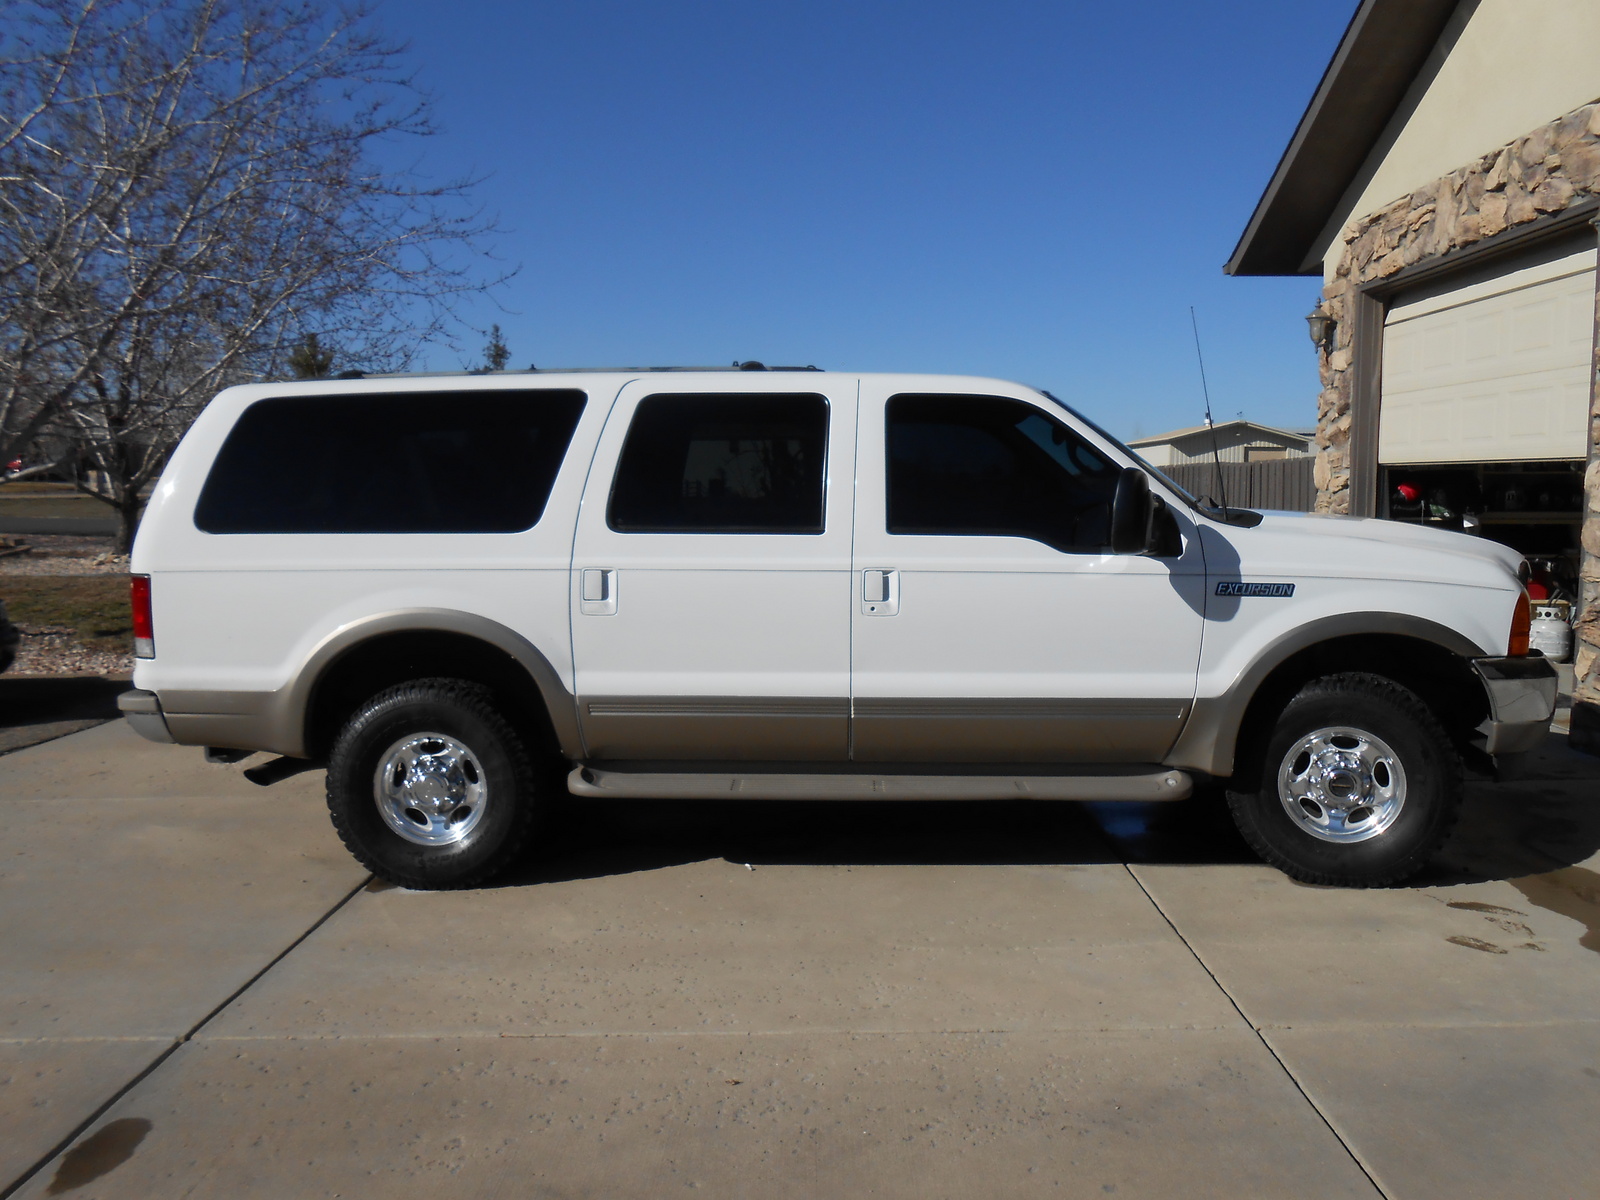 2000 Ford excursion limited mpg #2